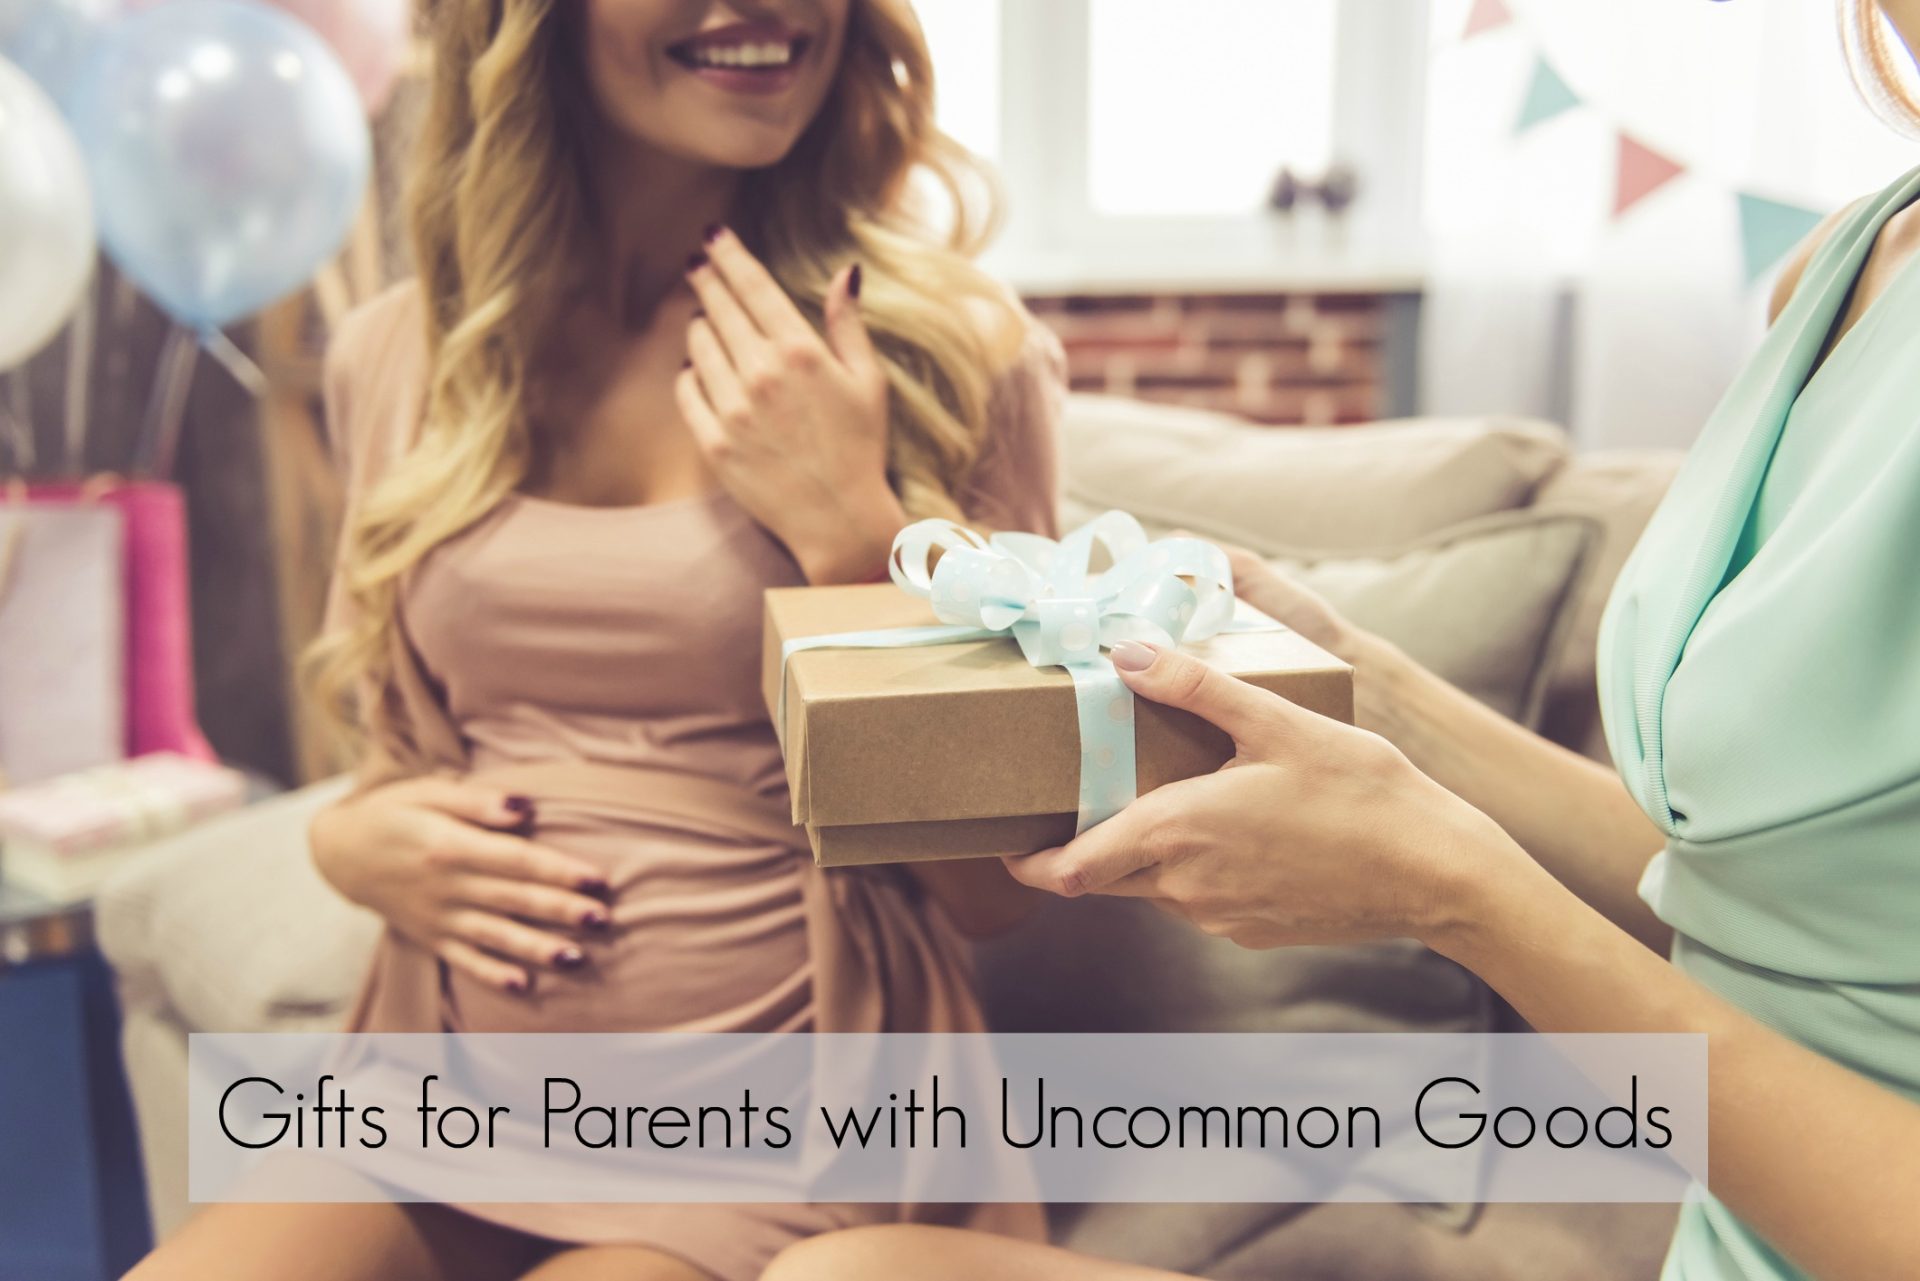 Birthday Gift Ideas for Parents with Uncommon Goods!